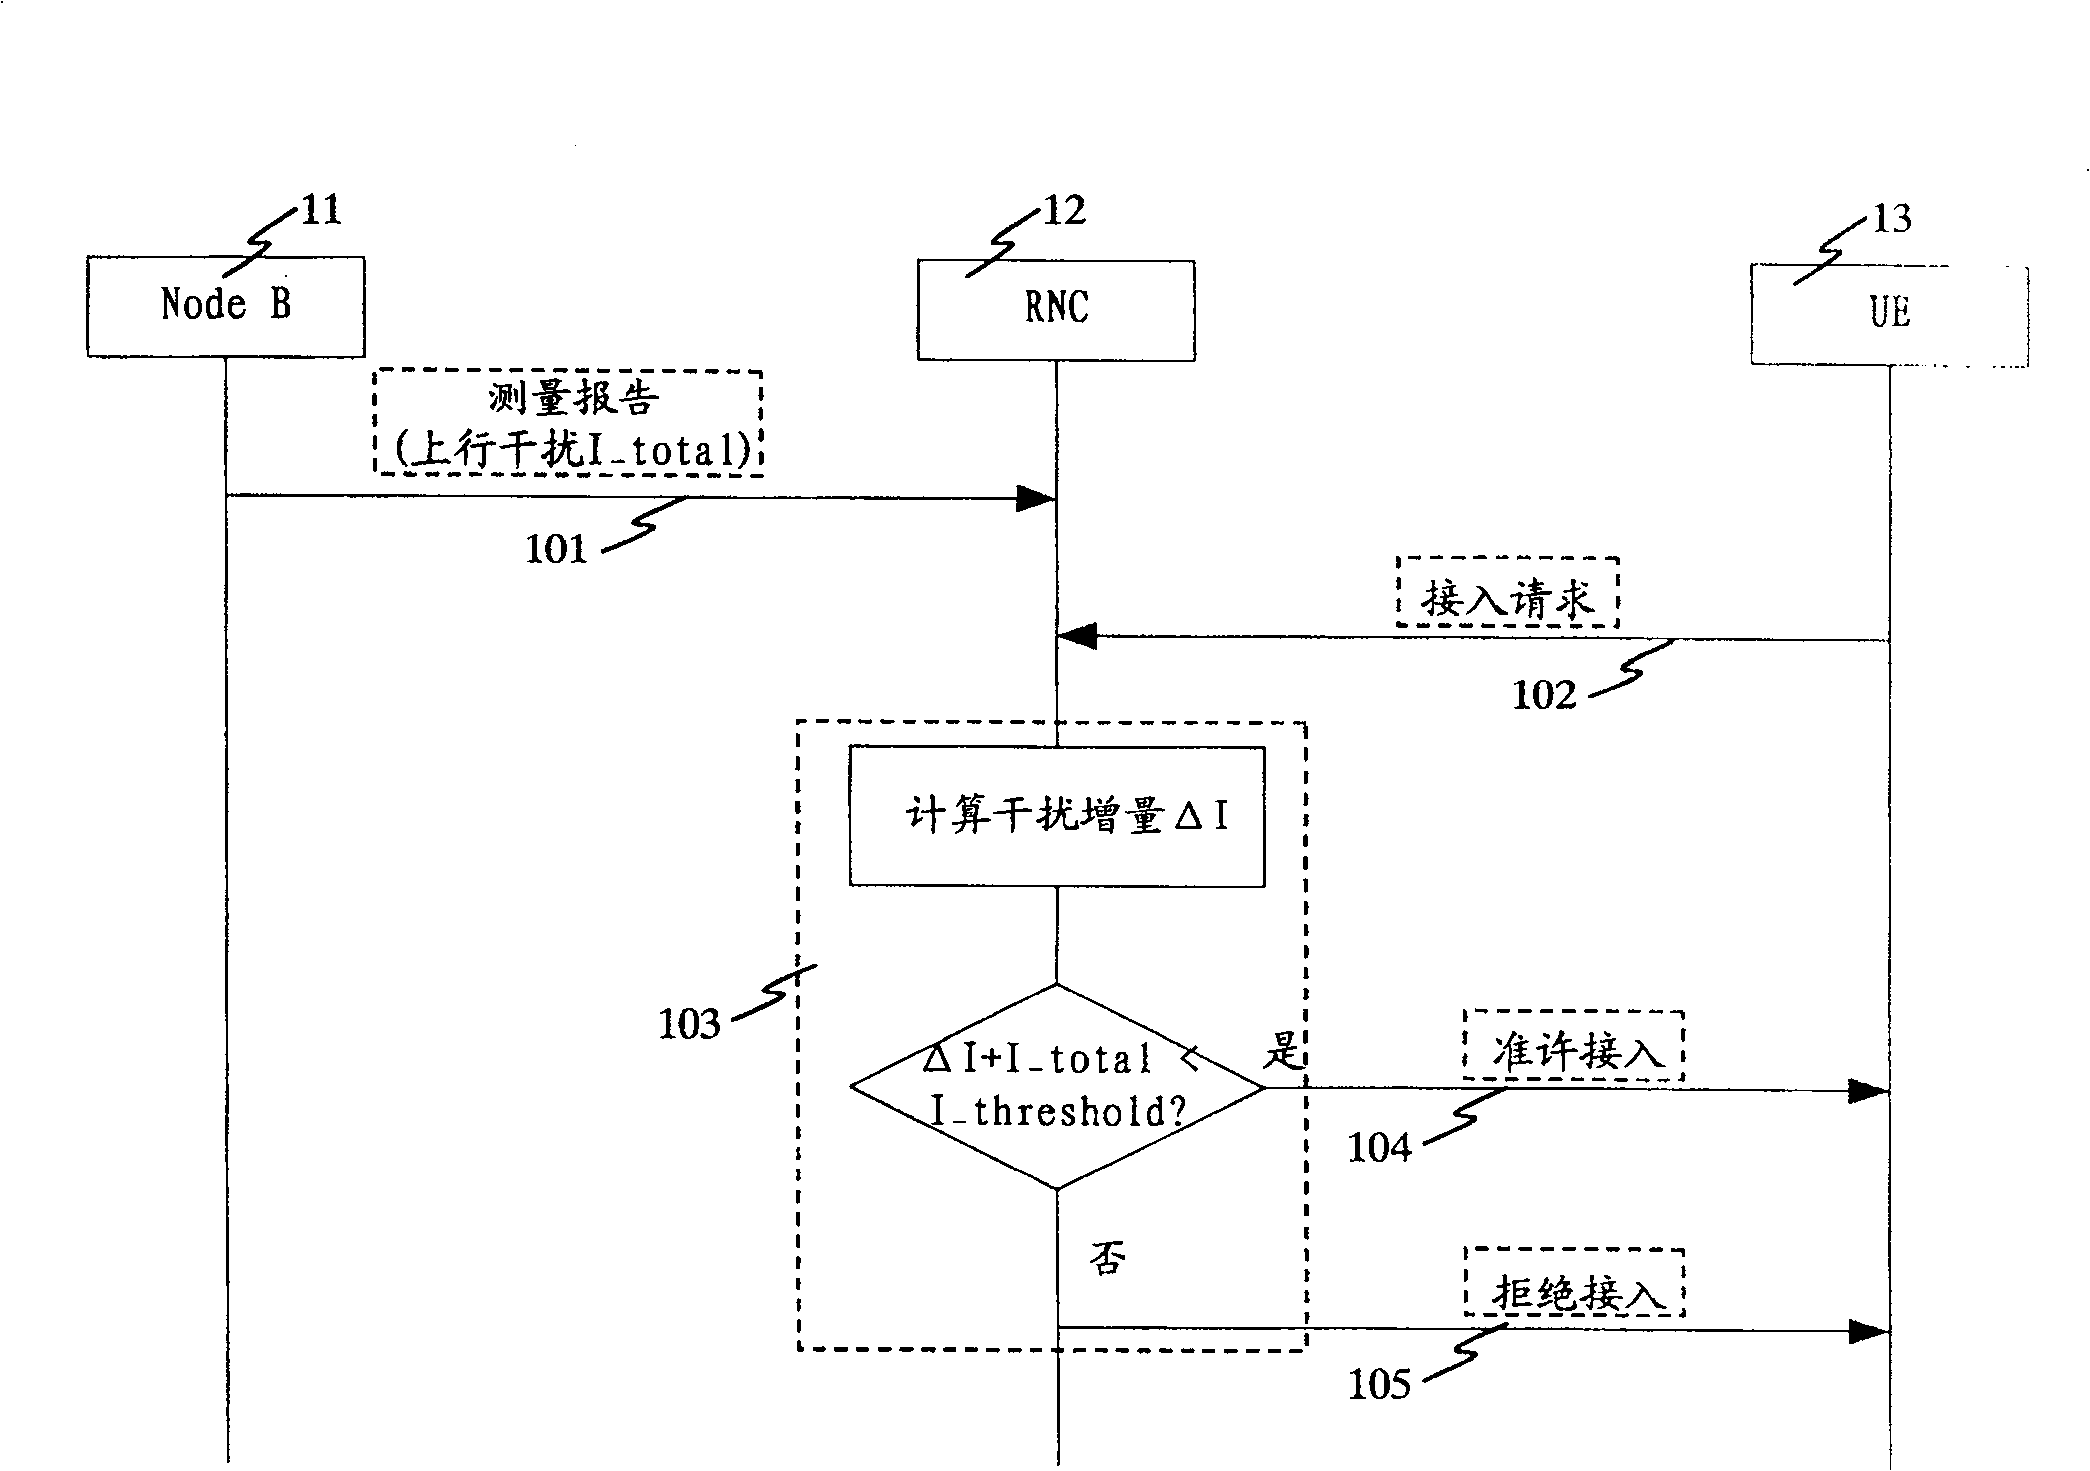 Control method for up intensifying channel receiving